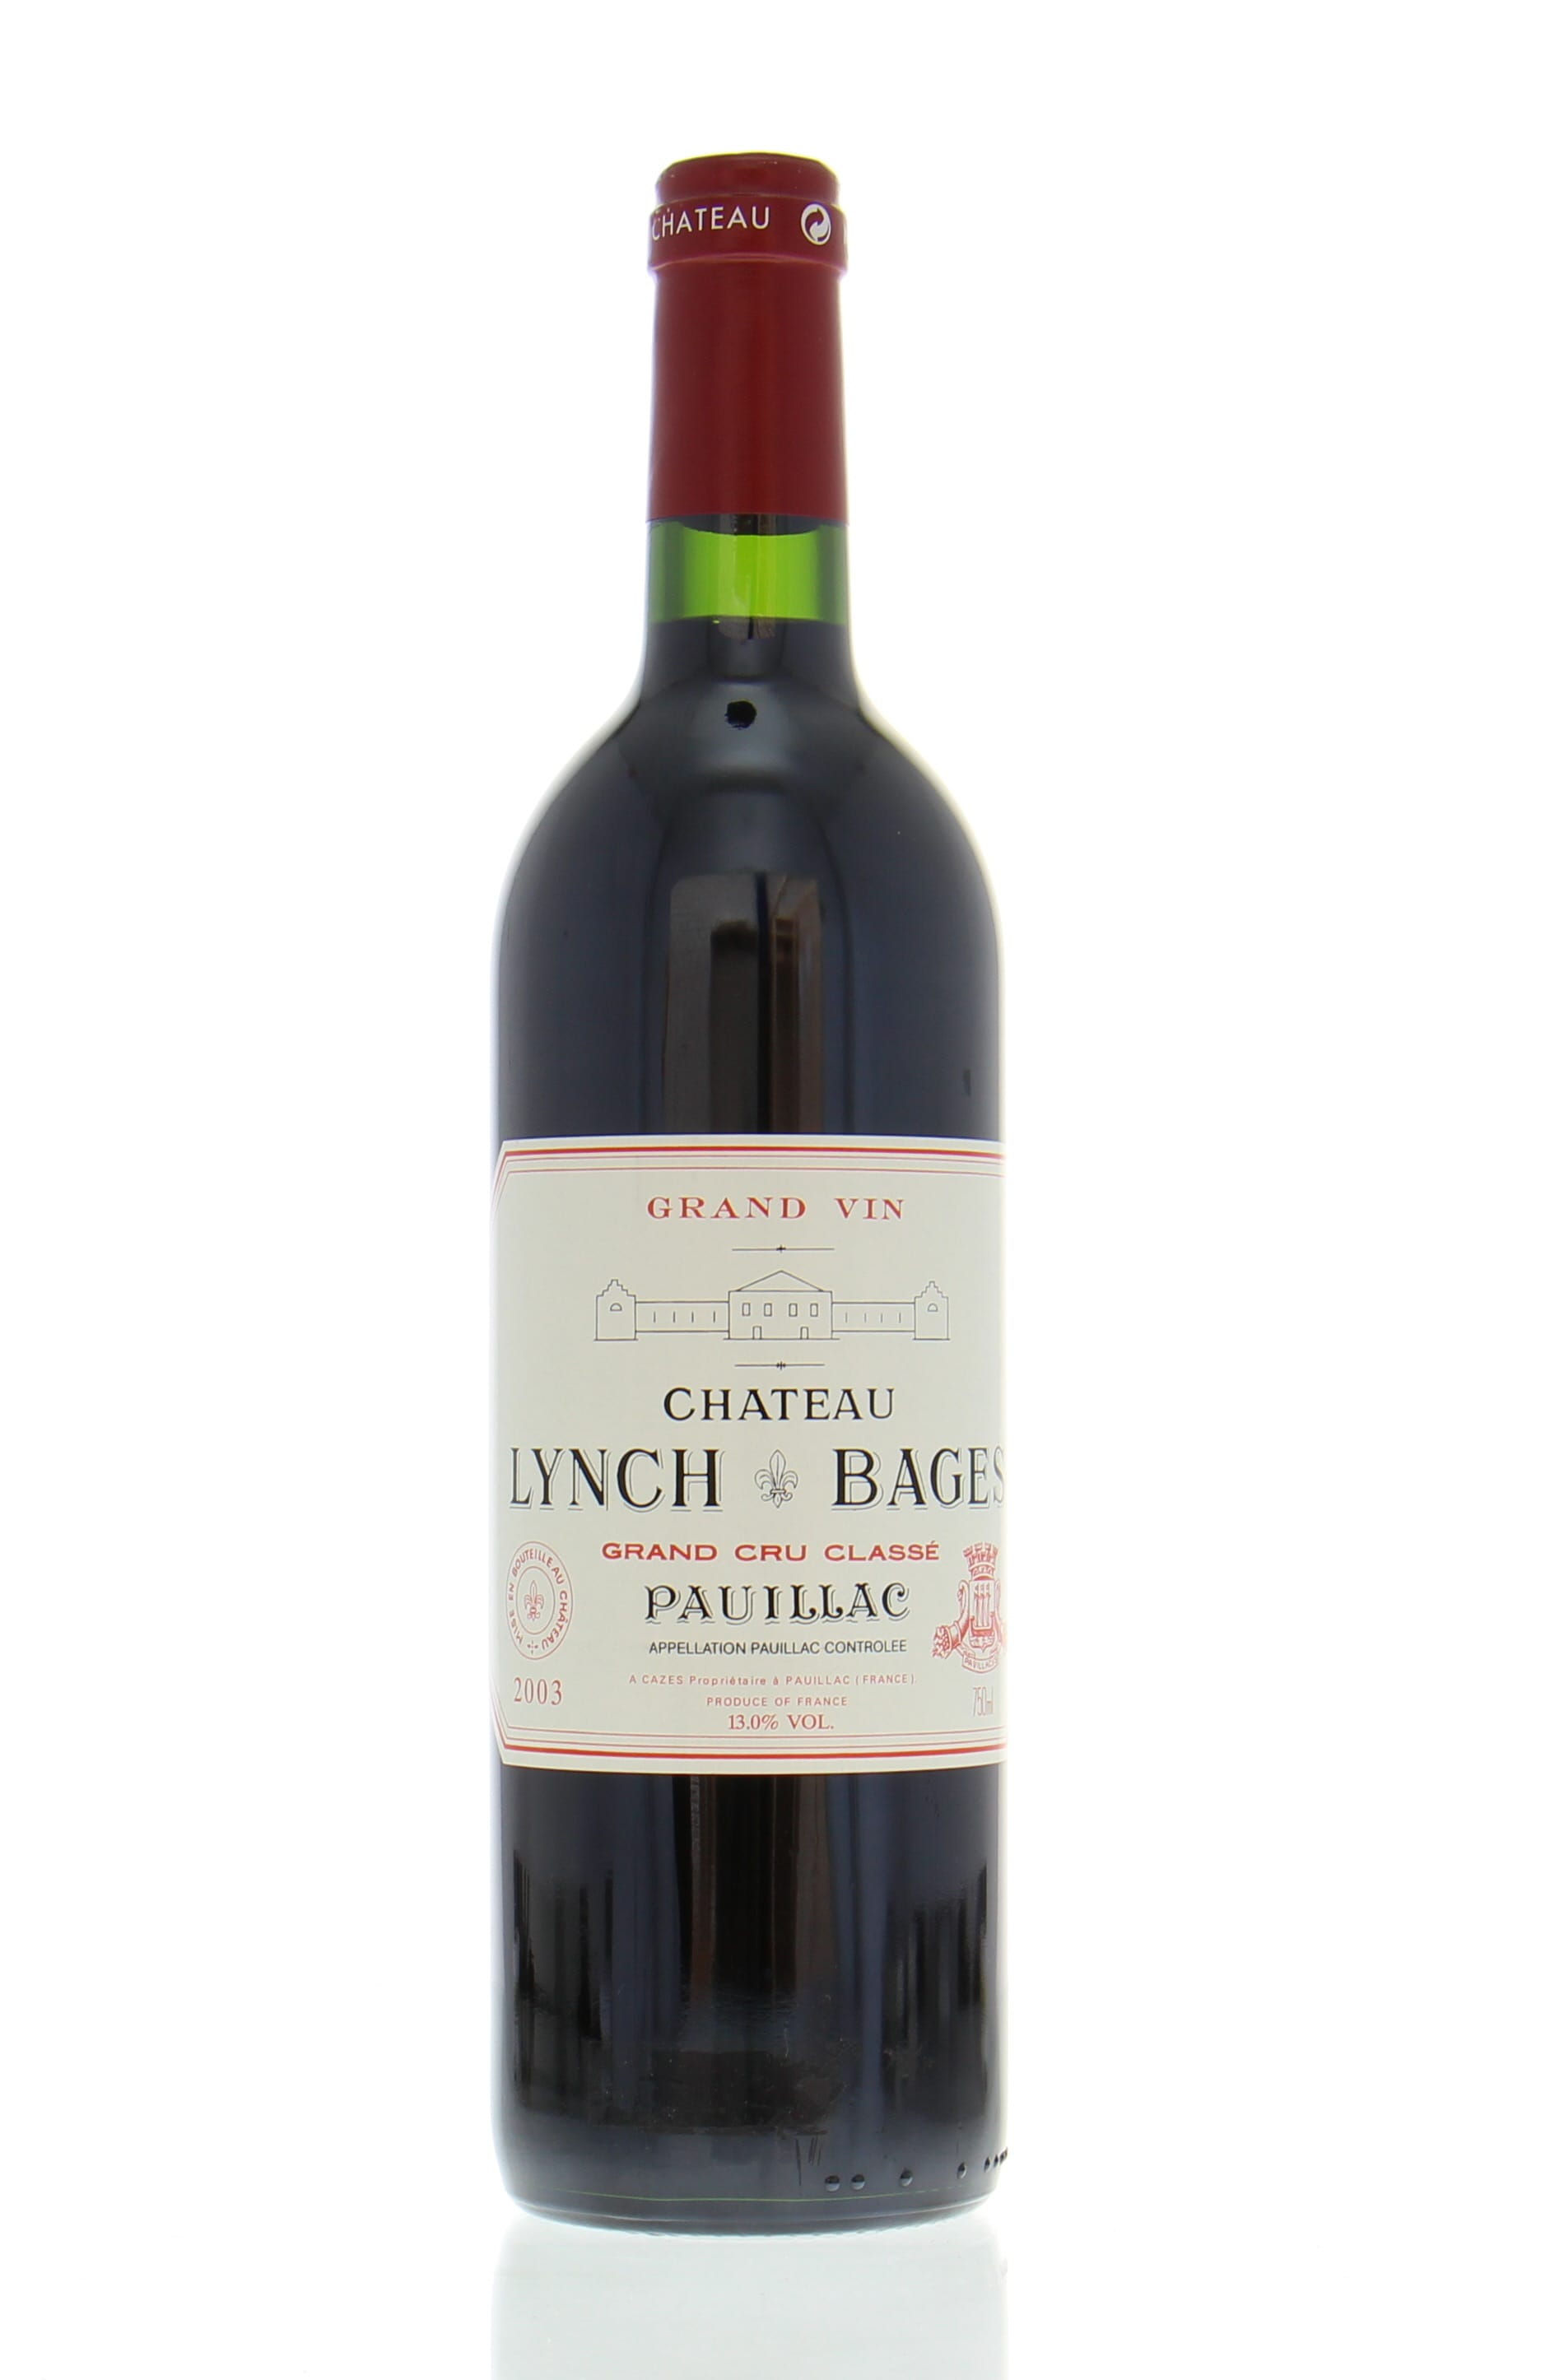 Chateau Lynch Bages - Chateau Lynch Bages 2003 perfect